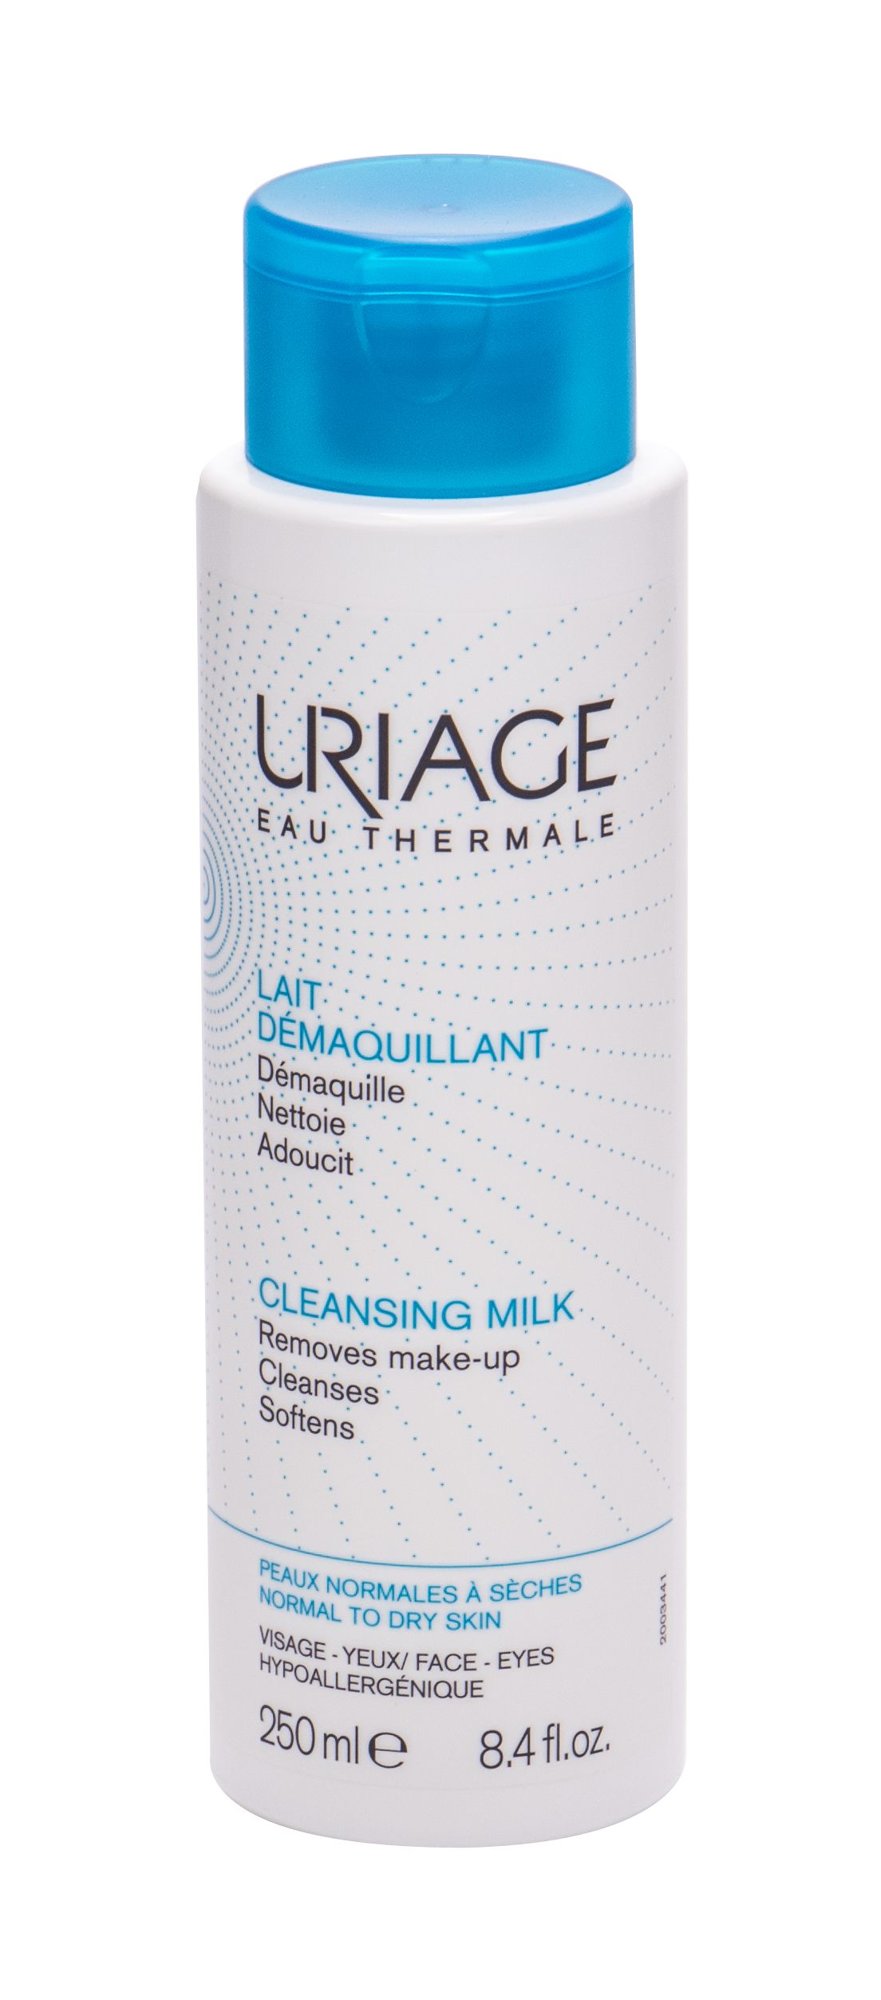 Uriage Eau Thermale Cleansing Milk